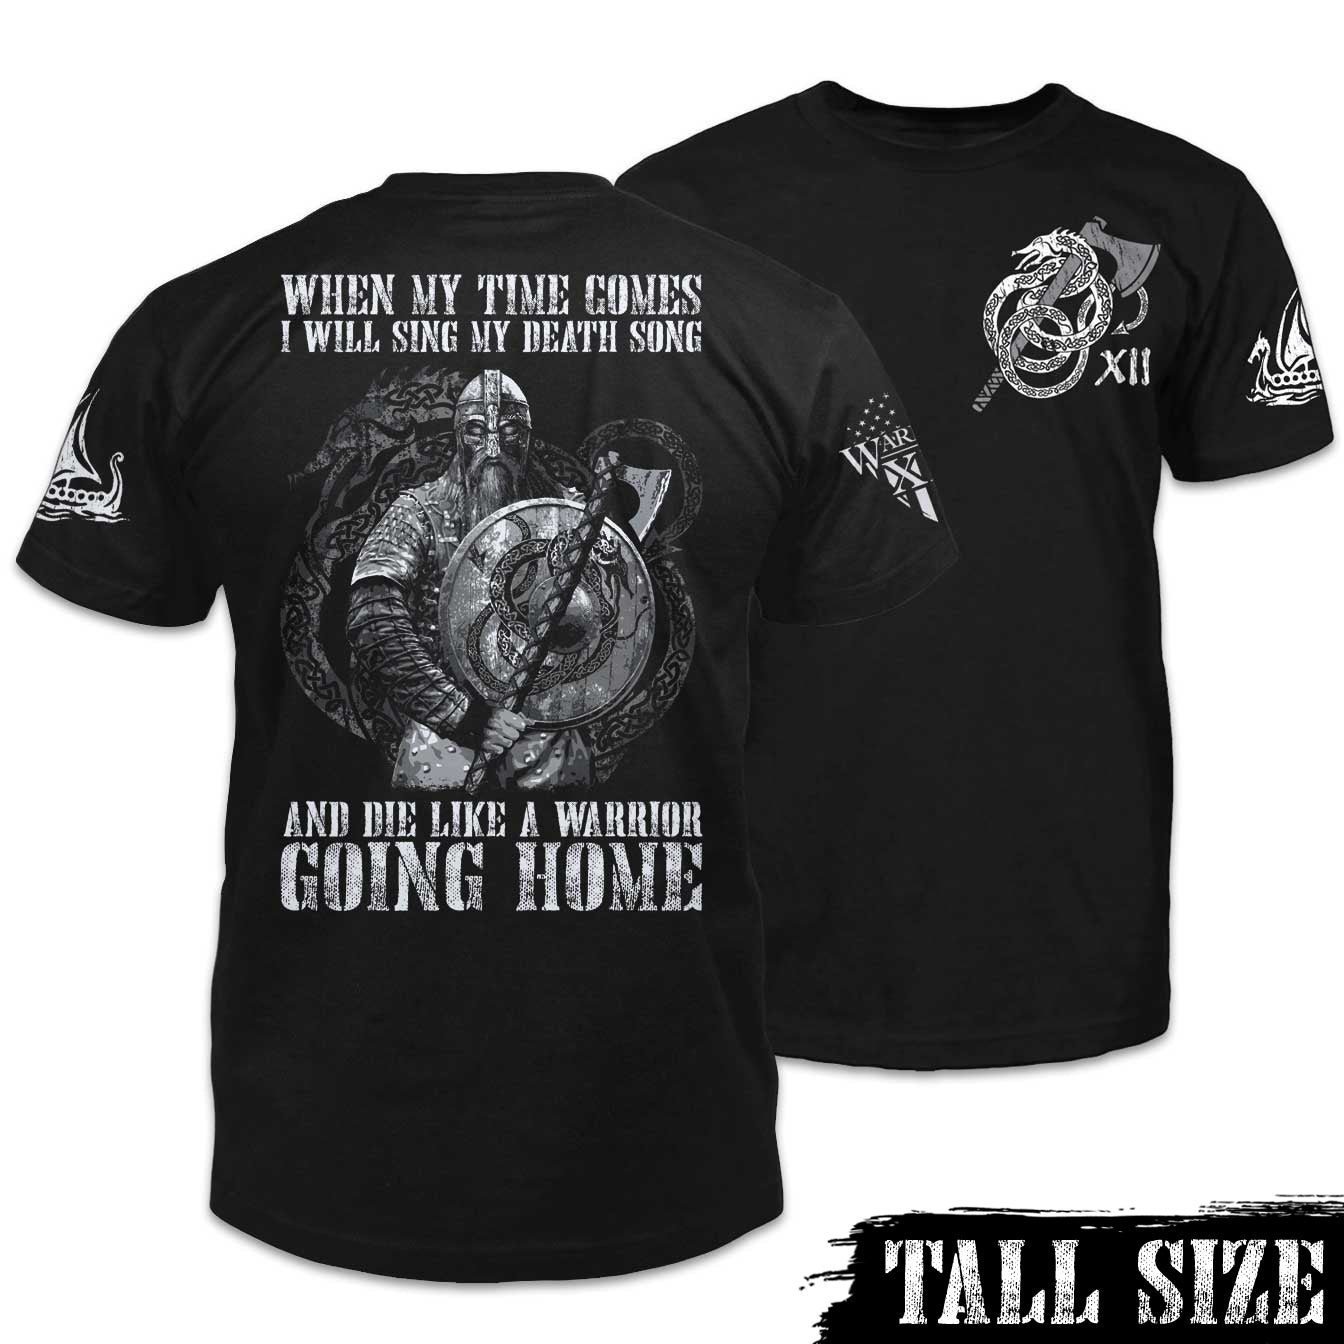 Front and back black tall size shirt with the words "When my time comes, I will sing my death song and die like a warrior going home" and fearless Viking warrior with a Nordic dragon in the background printed on the shirt.